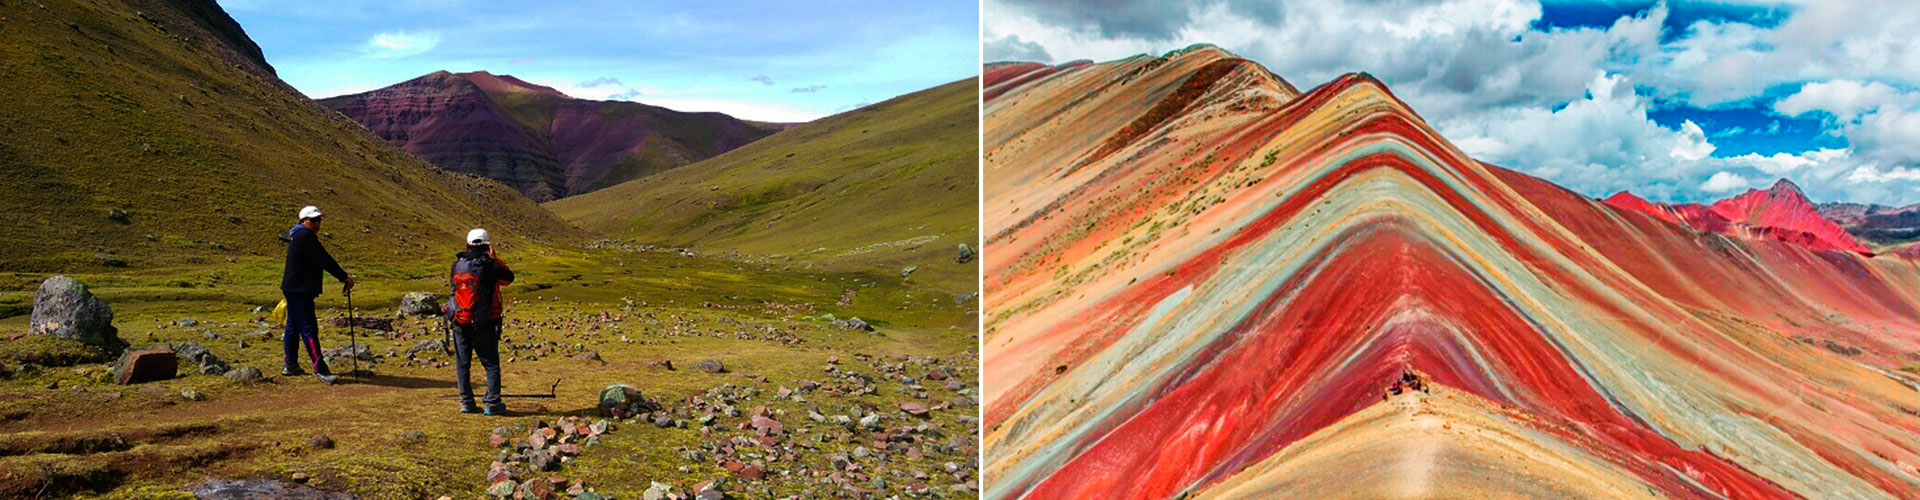 Full day Rainbow Mountain Andean Hikers Peru